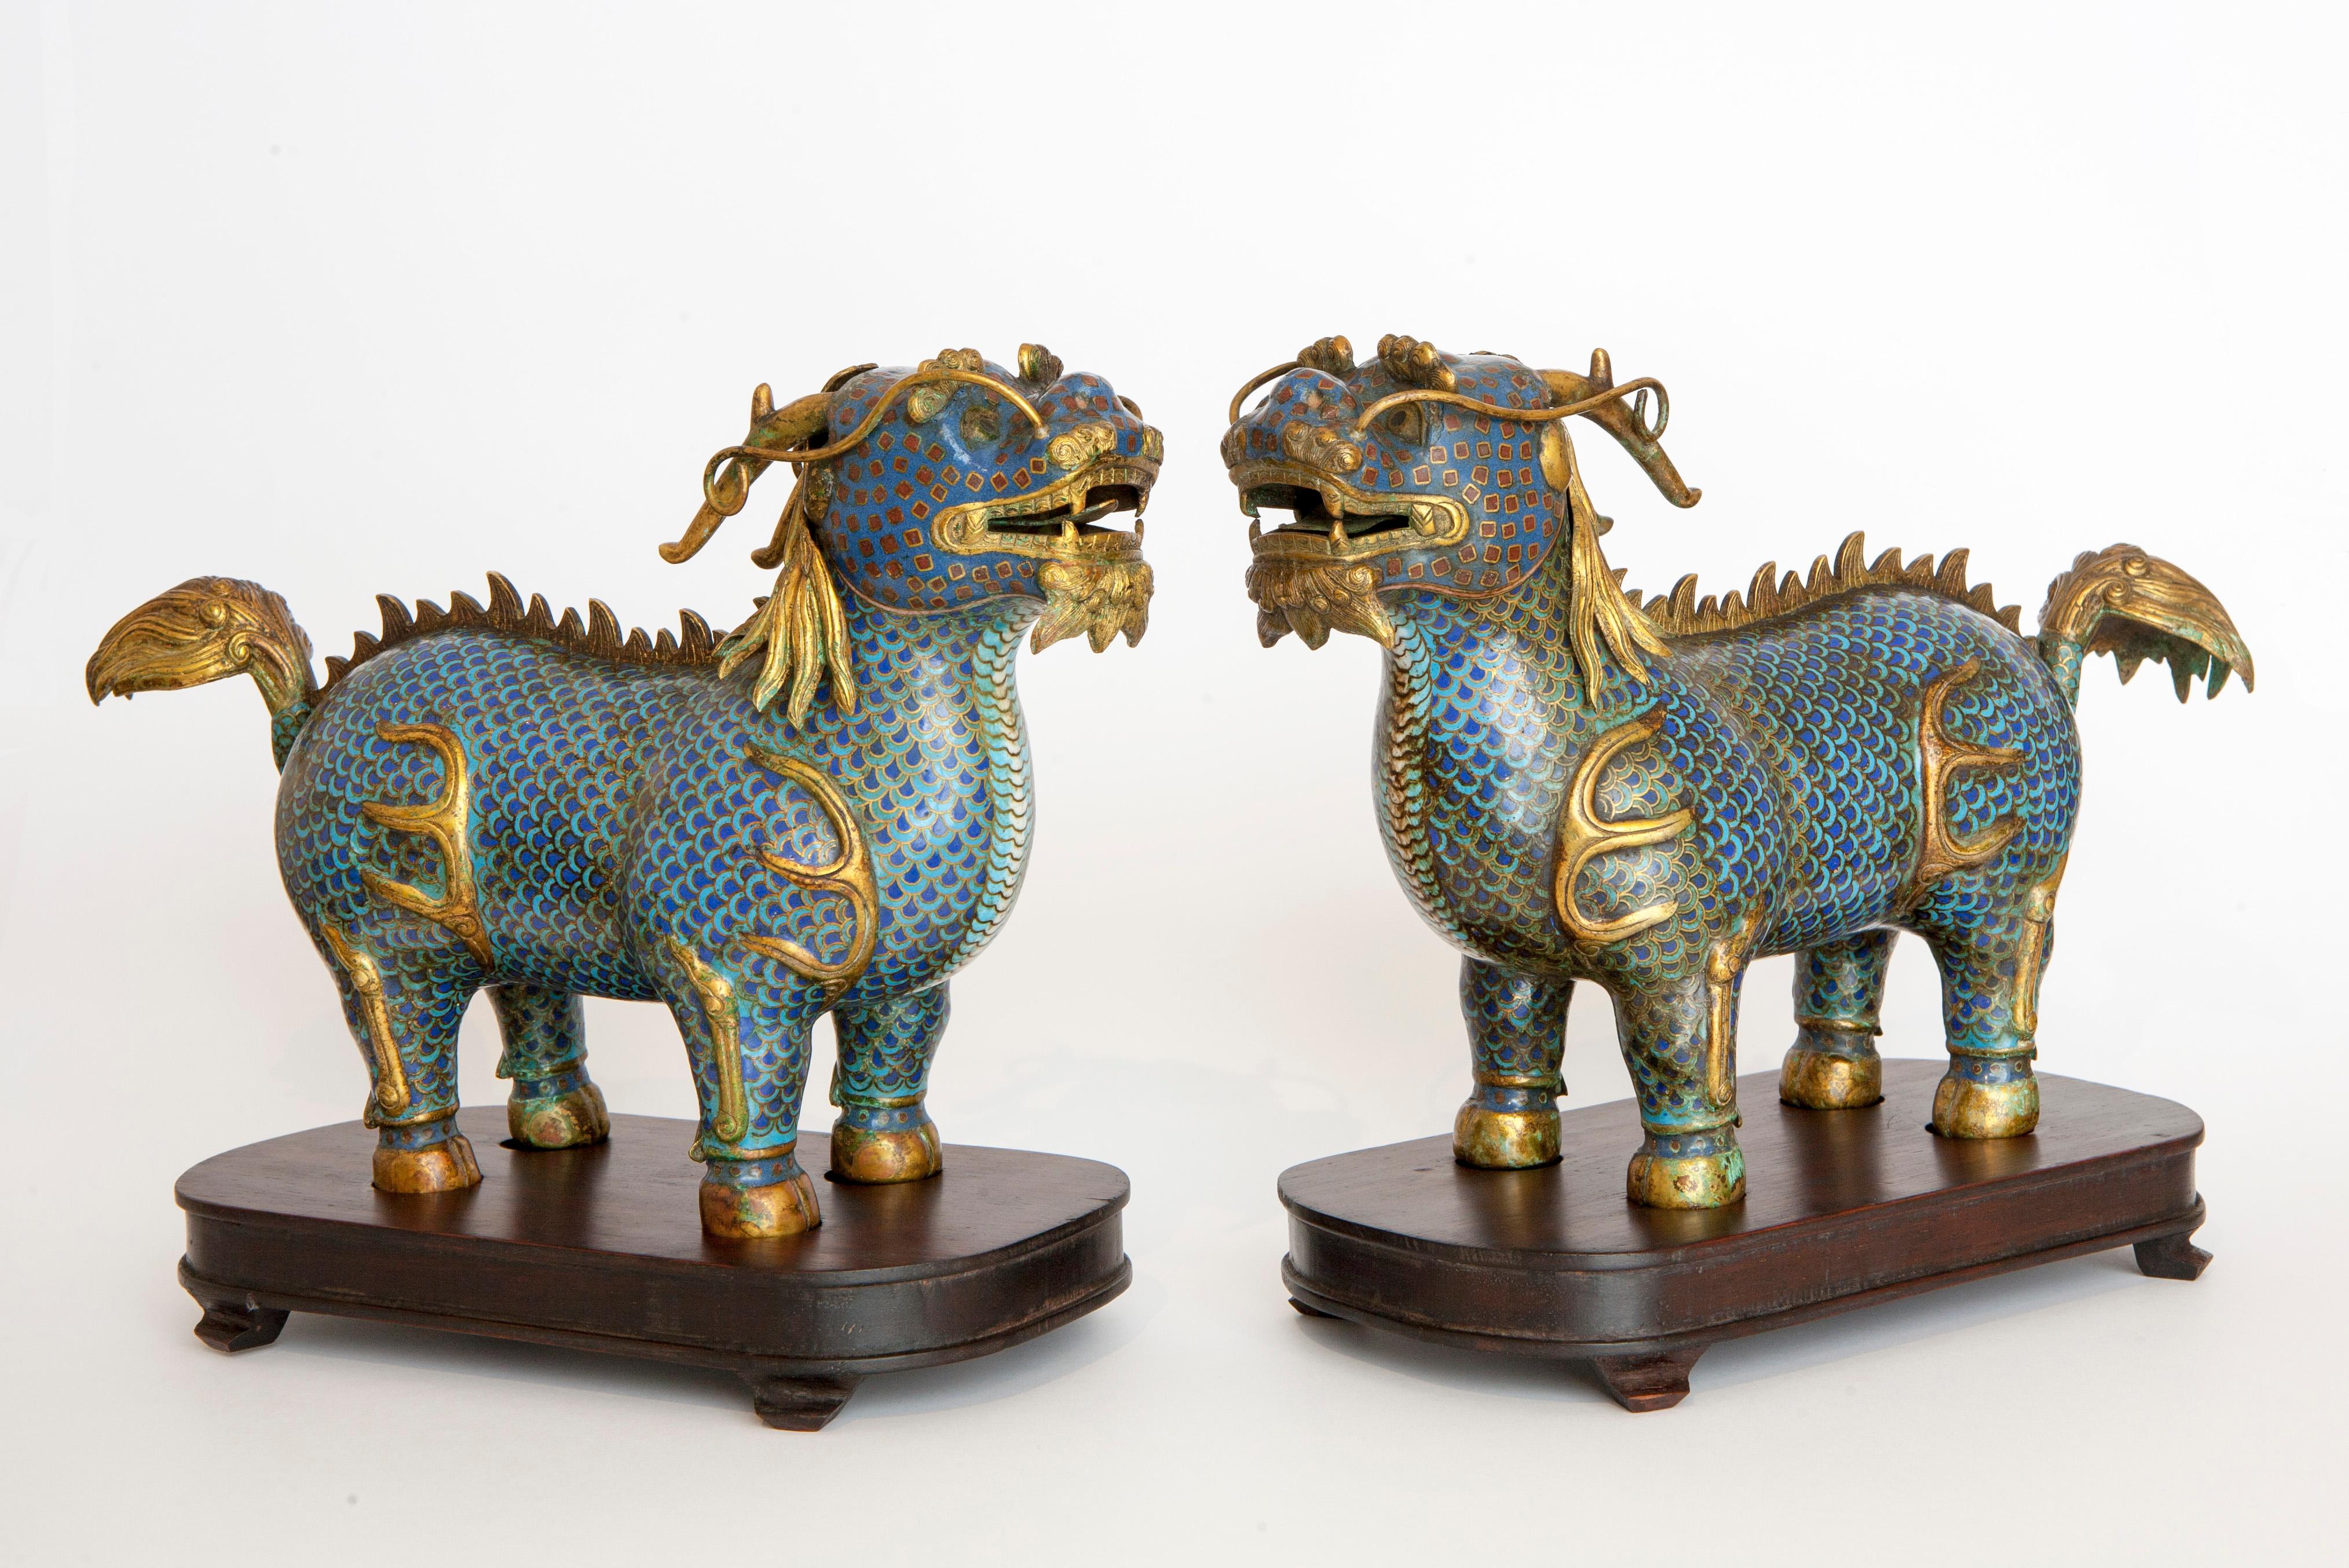 Pair of Qilin in cloisonné resting on wooden bases